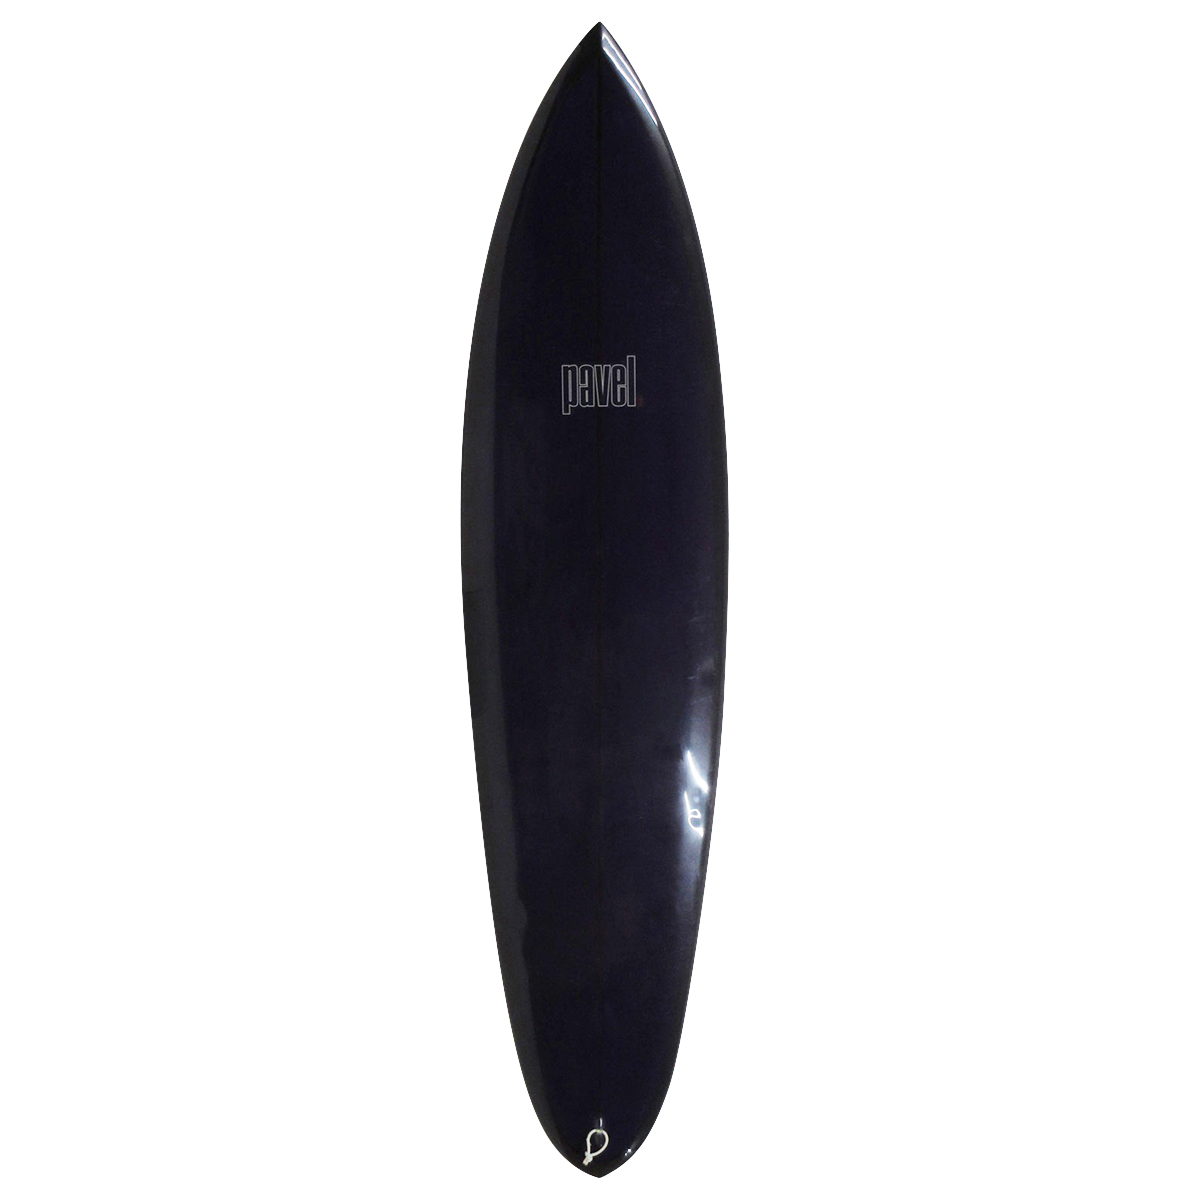 RICH PAVEL / 5FIN BONZER  Shaped by RICH PAVEL